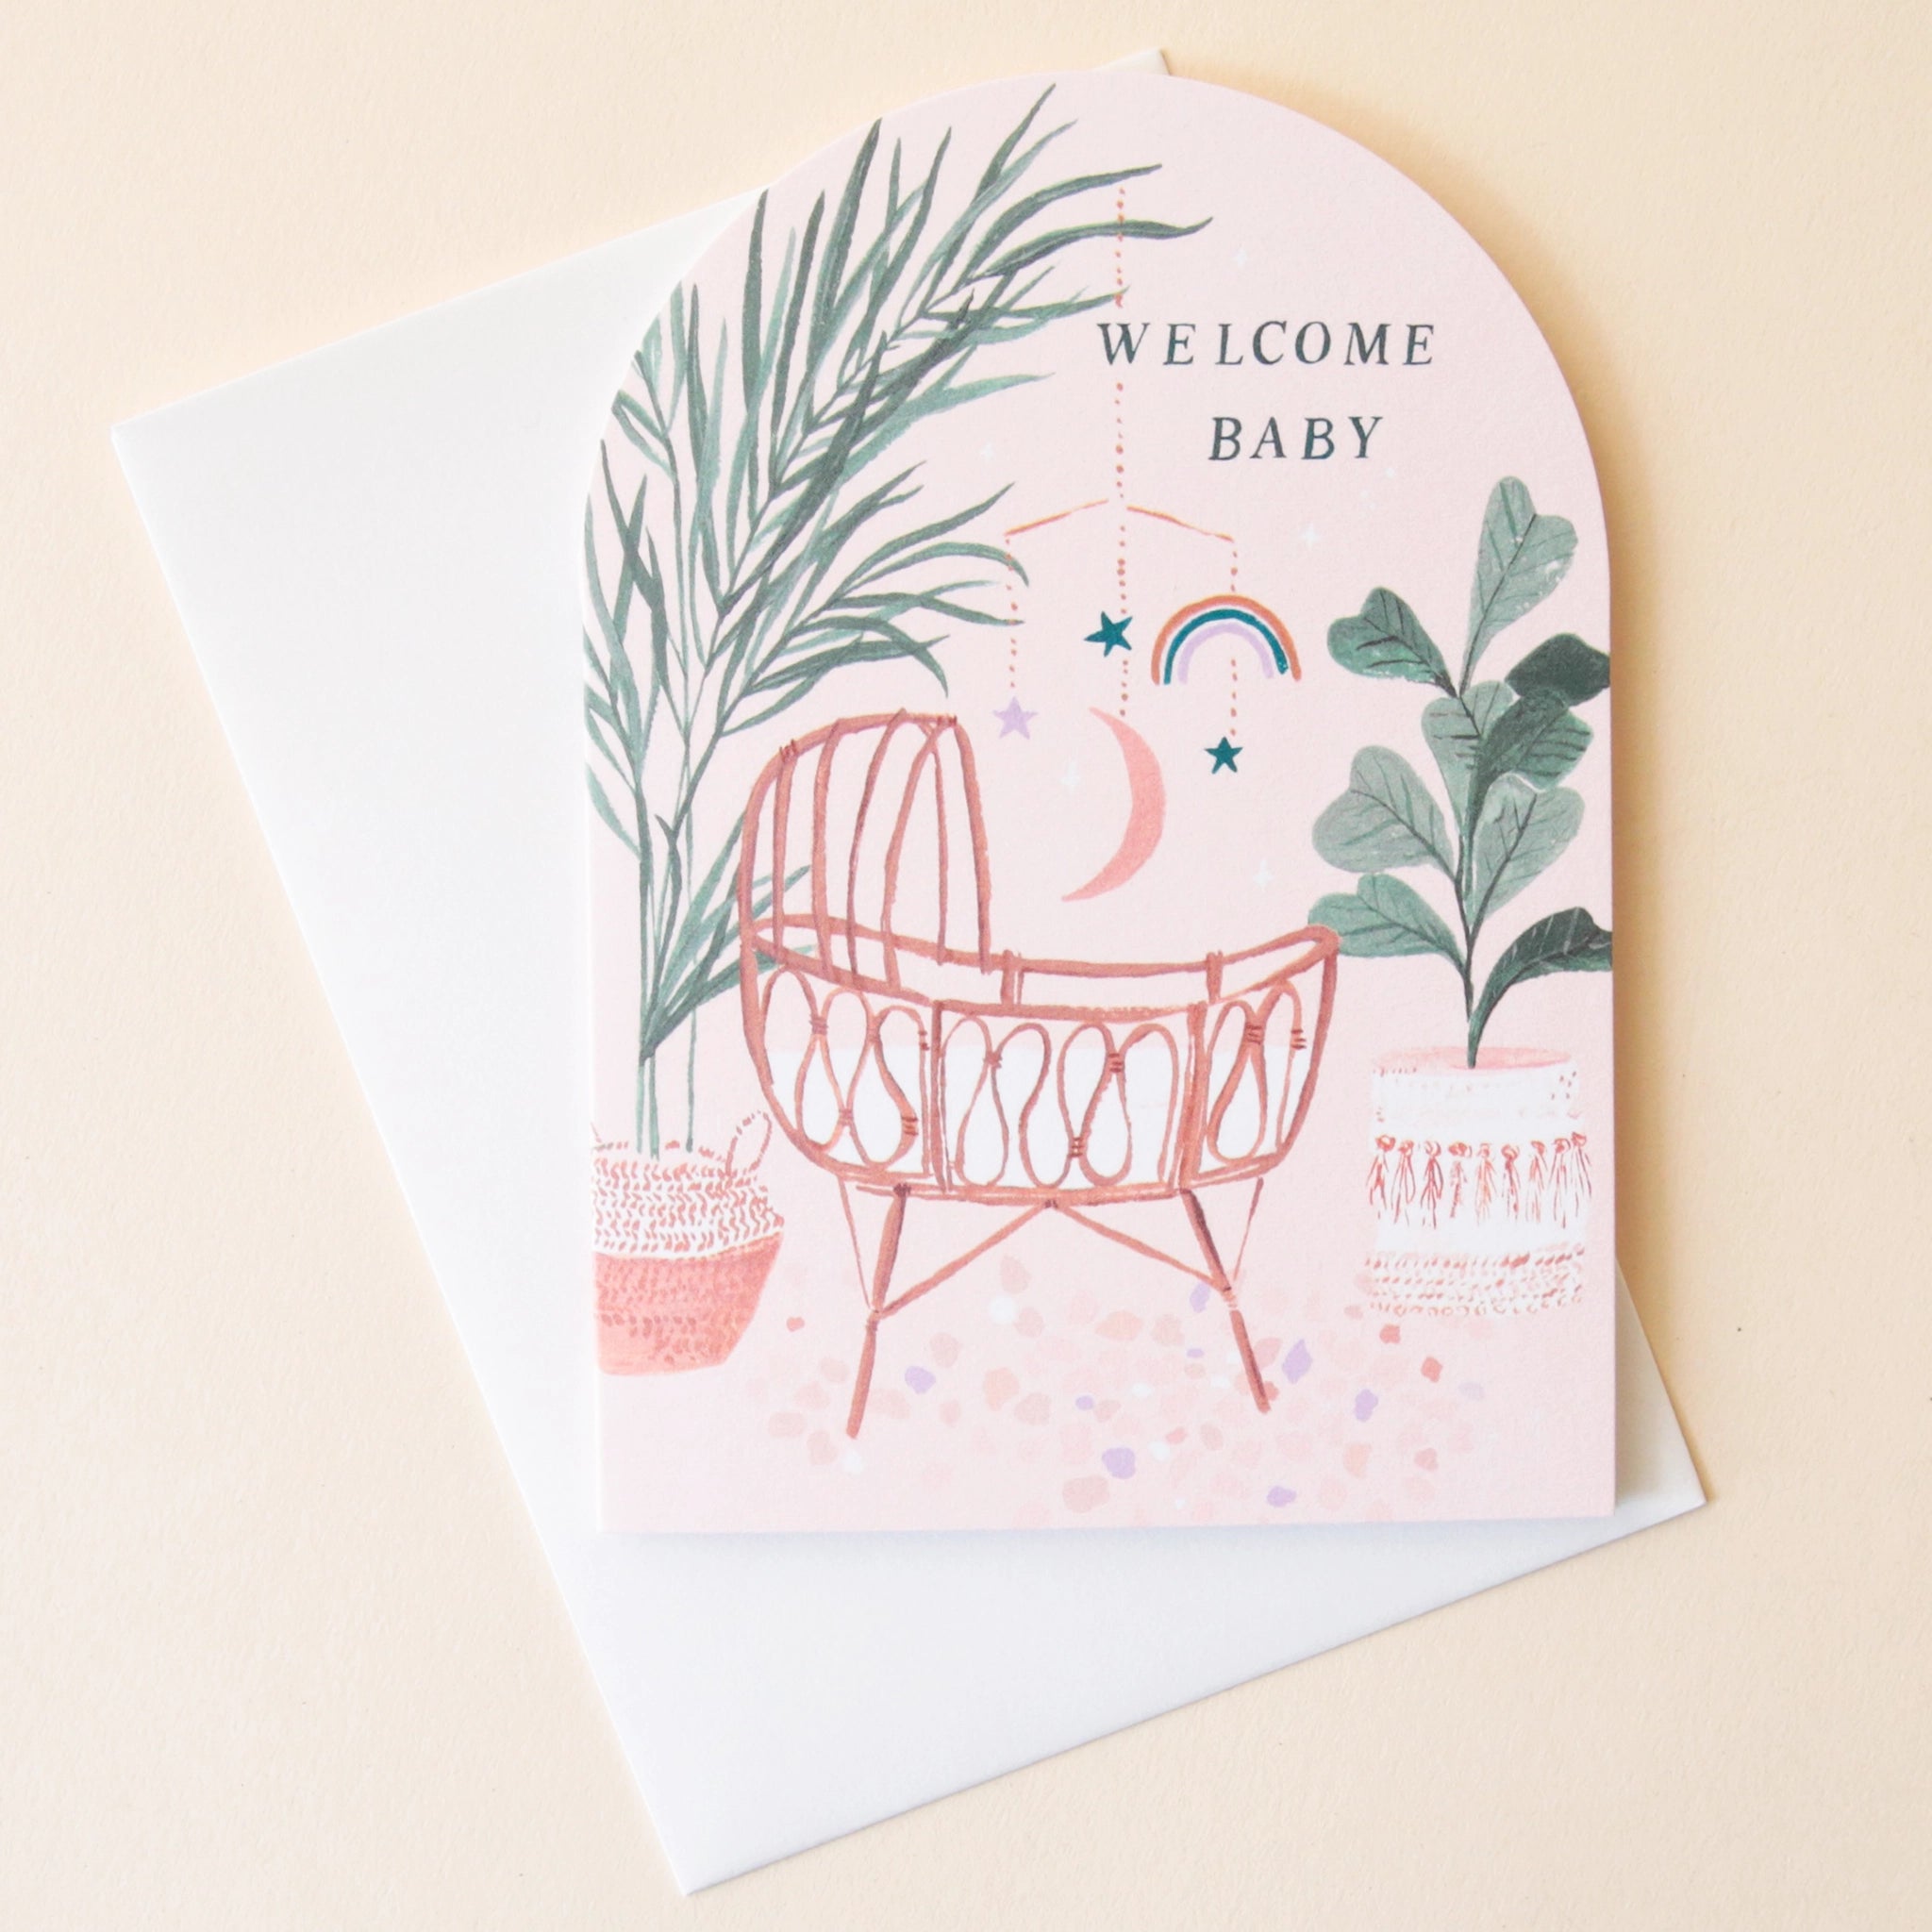 An arched greeting card with a sunset desert color pallet along with an illustration of a woven rattan baby&#39;s crib along with bohemian illustrations of lush natural foliage, bamboo, palm trees, and dried flowers and text at the top that reads, &quot;Welcome Baby&quot; in black letters.